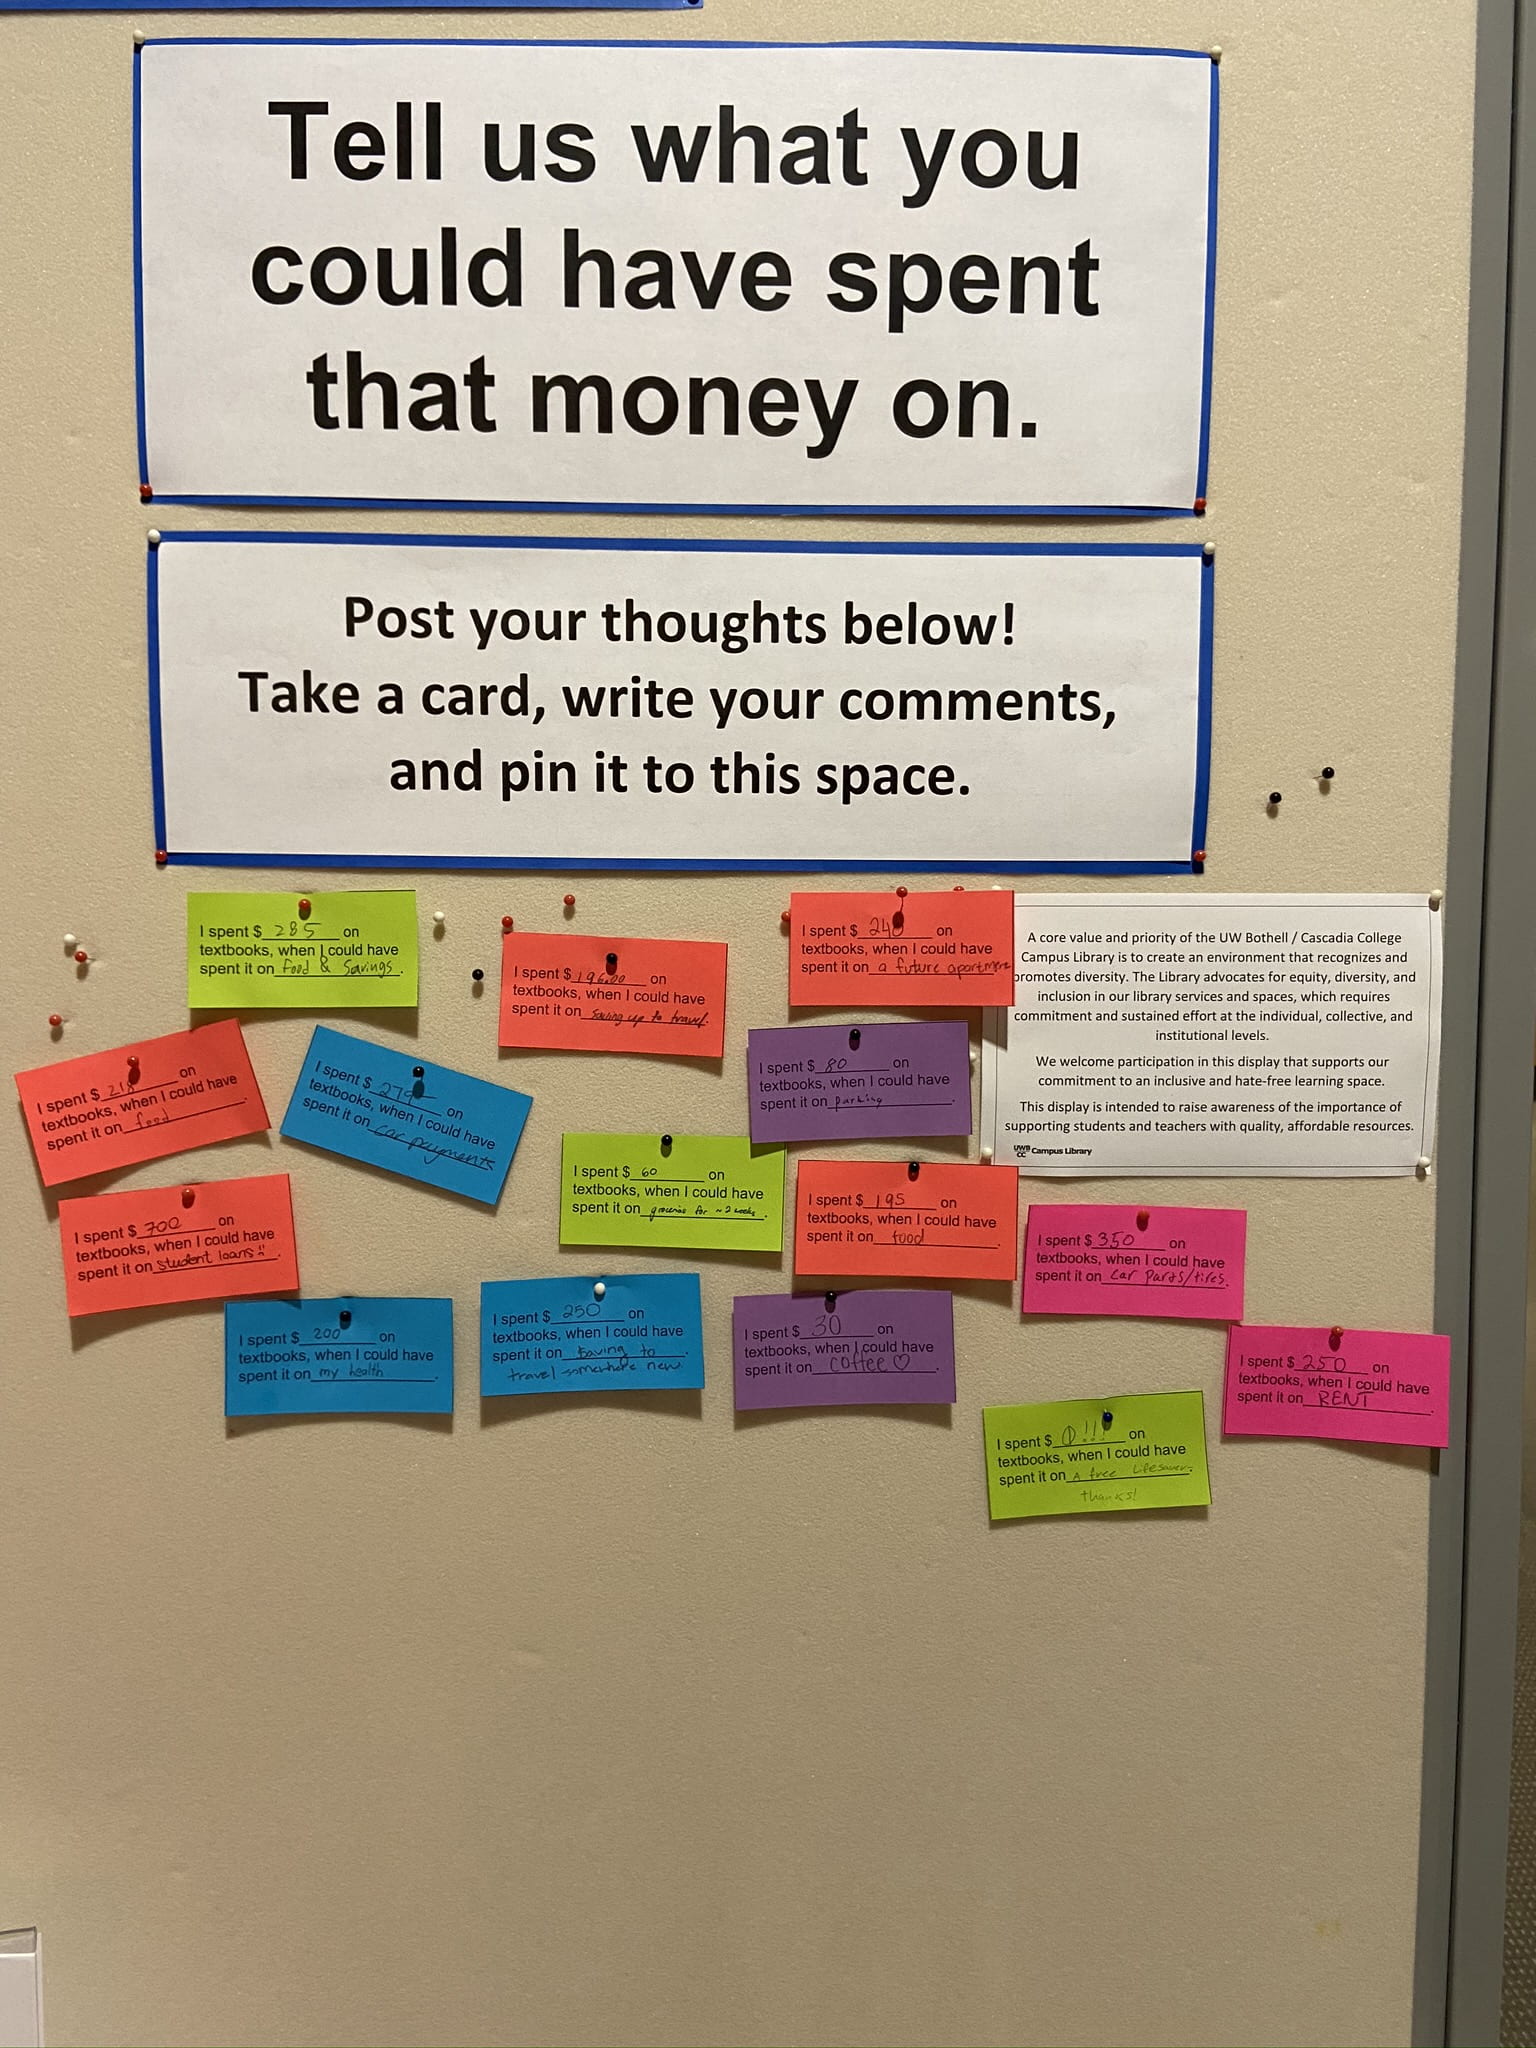 Section of panel display titled "tell us what you could have spent that money on", referring to money spent on textbooks. Students provided cards telling how much they've spent on textbooks and what else they could have used the money for.